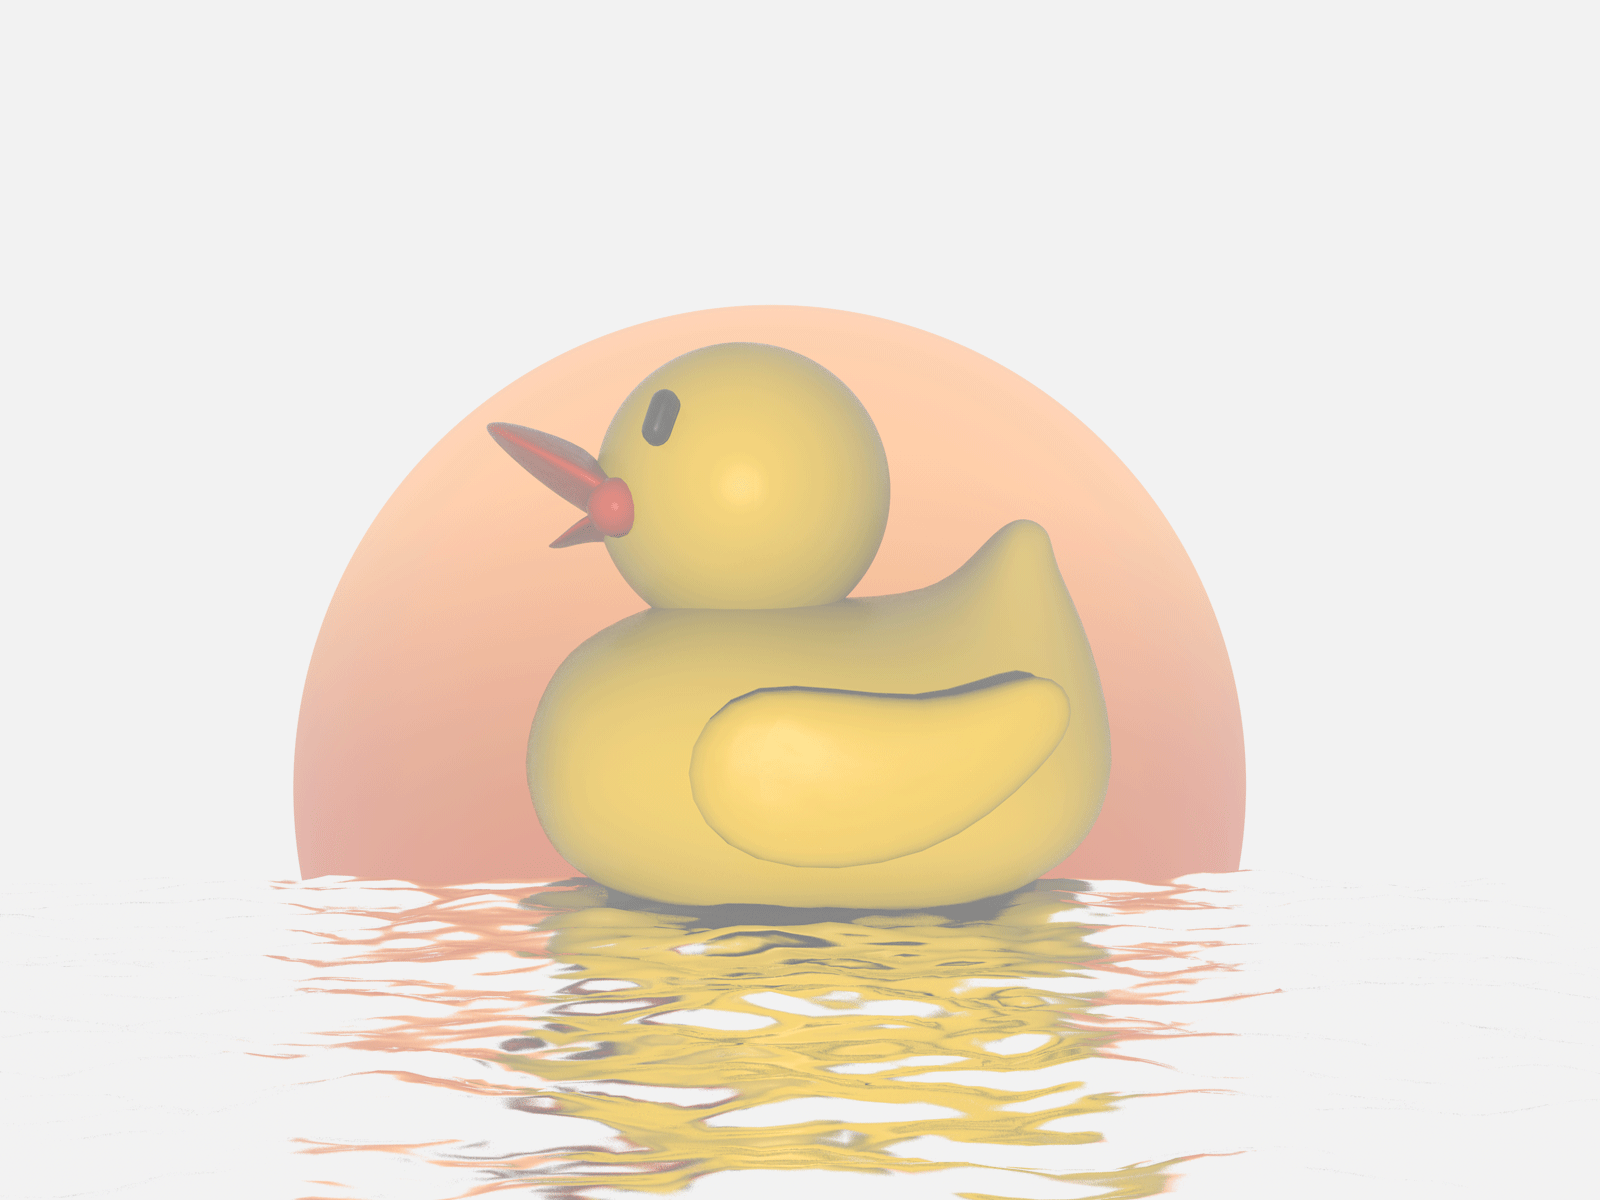 Rubber Ducky with Waves 3d 3d modeling animated gif animation design c4d c4dfordesigners